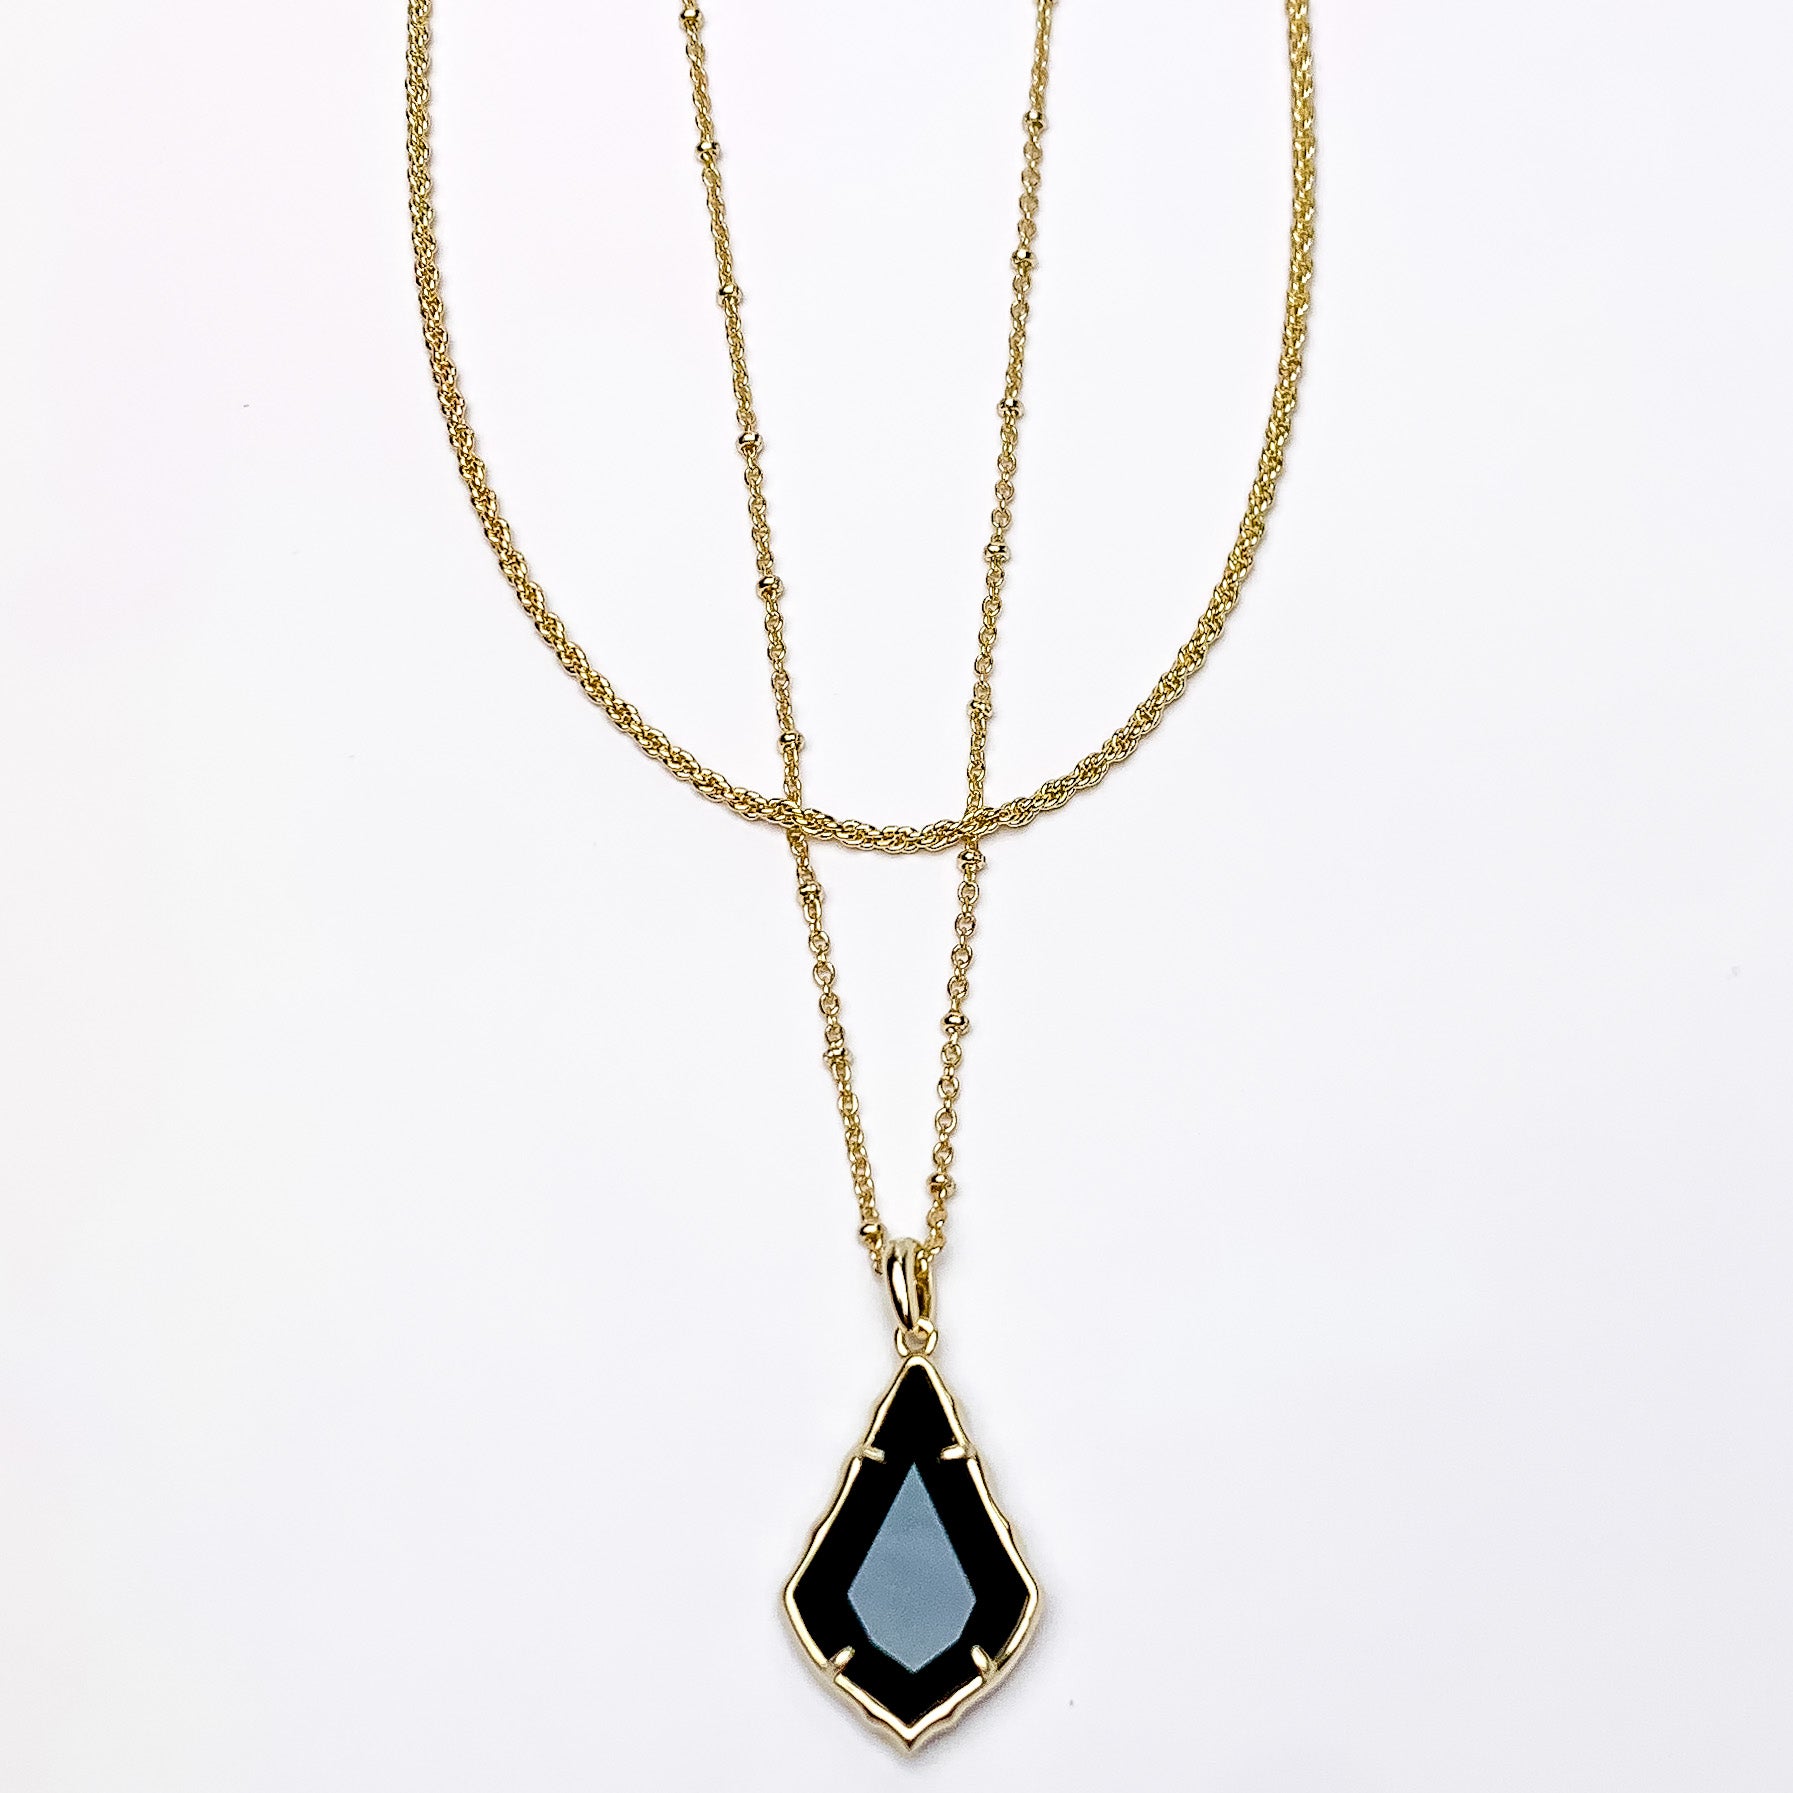 Two gold chain necklaces with the longer strand that has a gold and black opaque glass pendant. This necklace is pictured on a white background. 